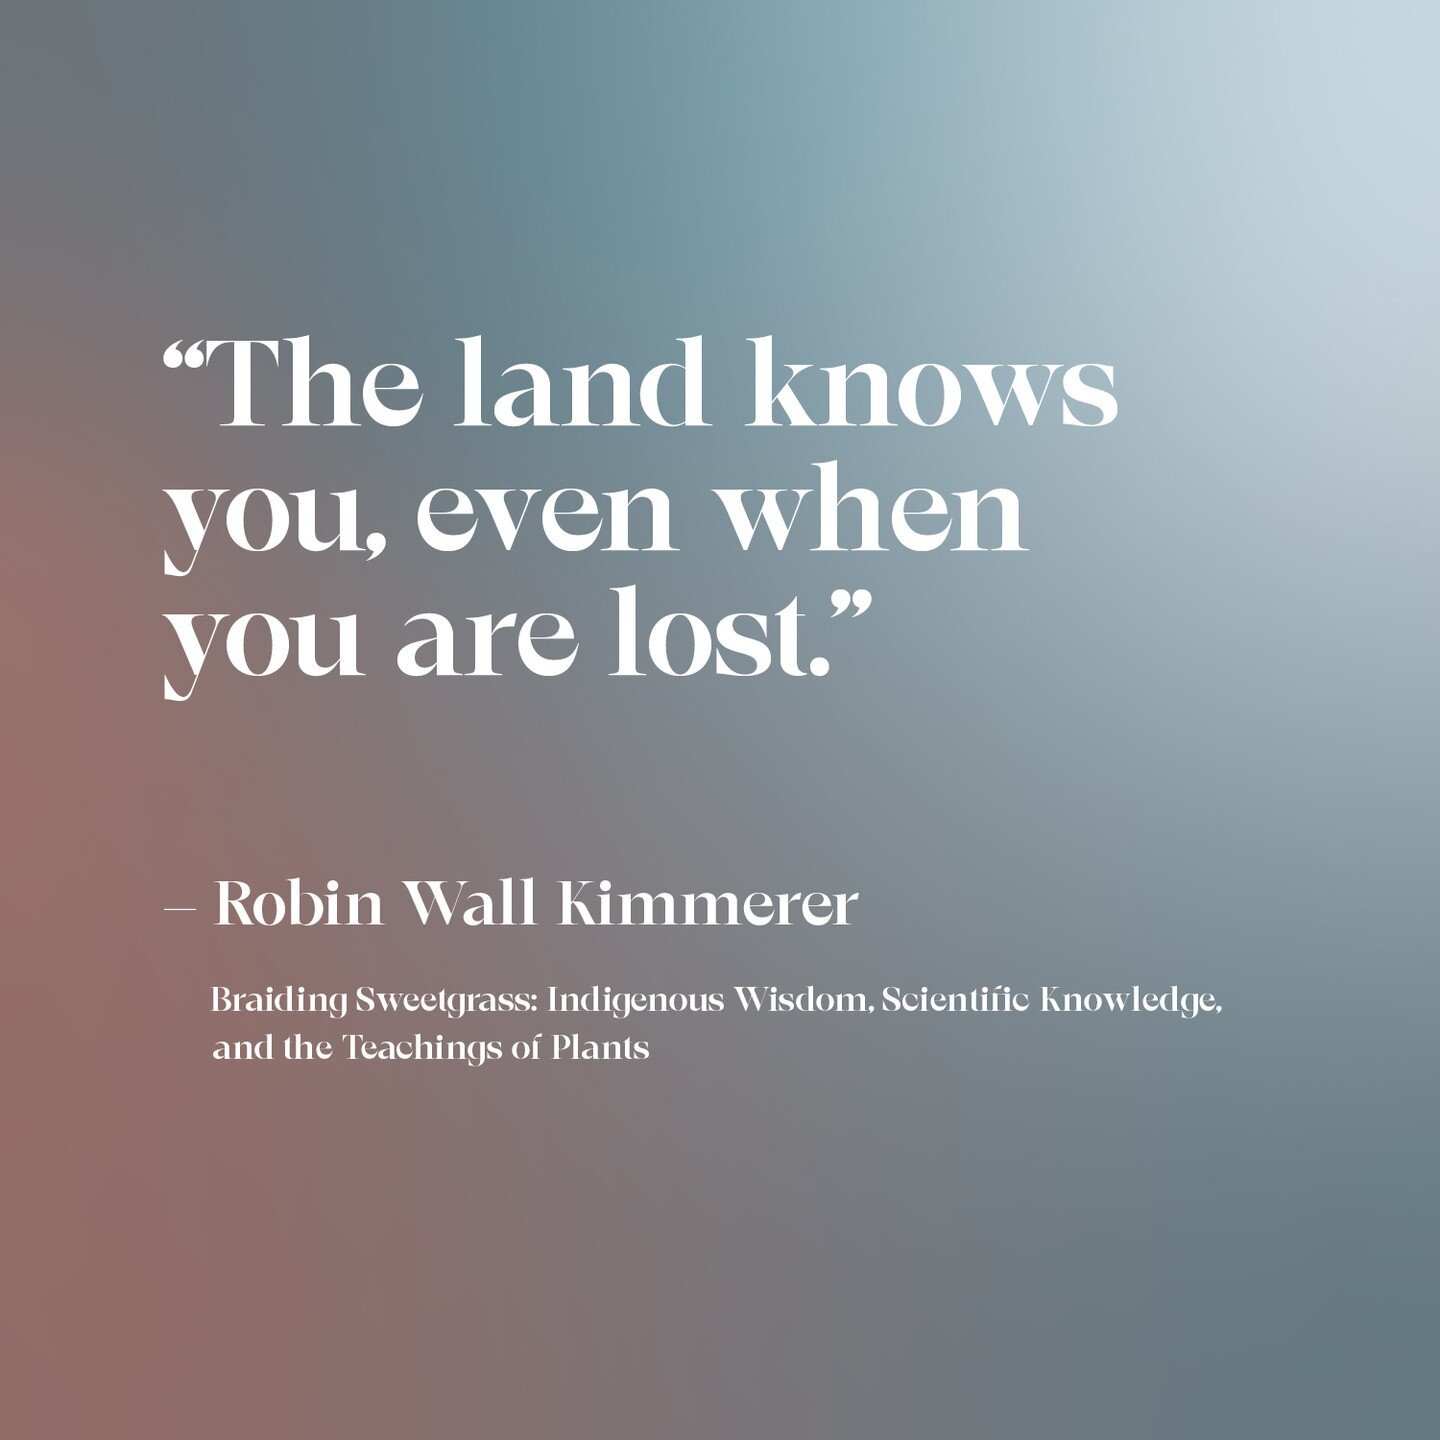 &quot;The land knows you, even when you are lost.&quot; &ndash; Robin Wall Kimmerer

Highly recommend this beautiful book, Braiding Sweetgrass, by Robin Wall Kimmerer. It's science. It's poetry. It's wisdom and beauty. Order it from your local book s